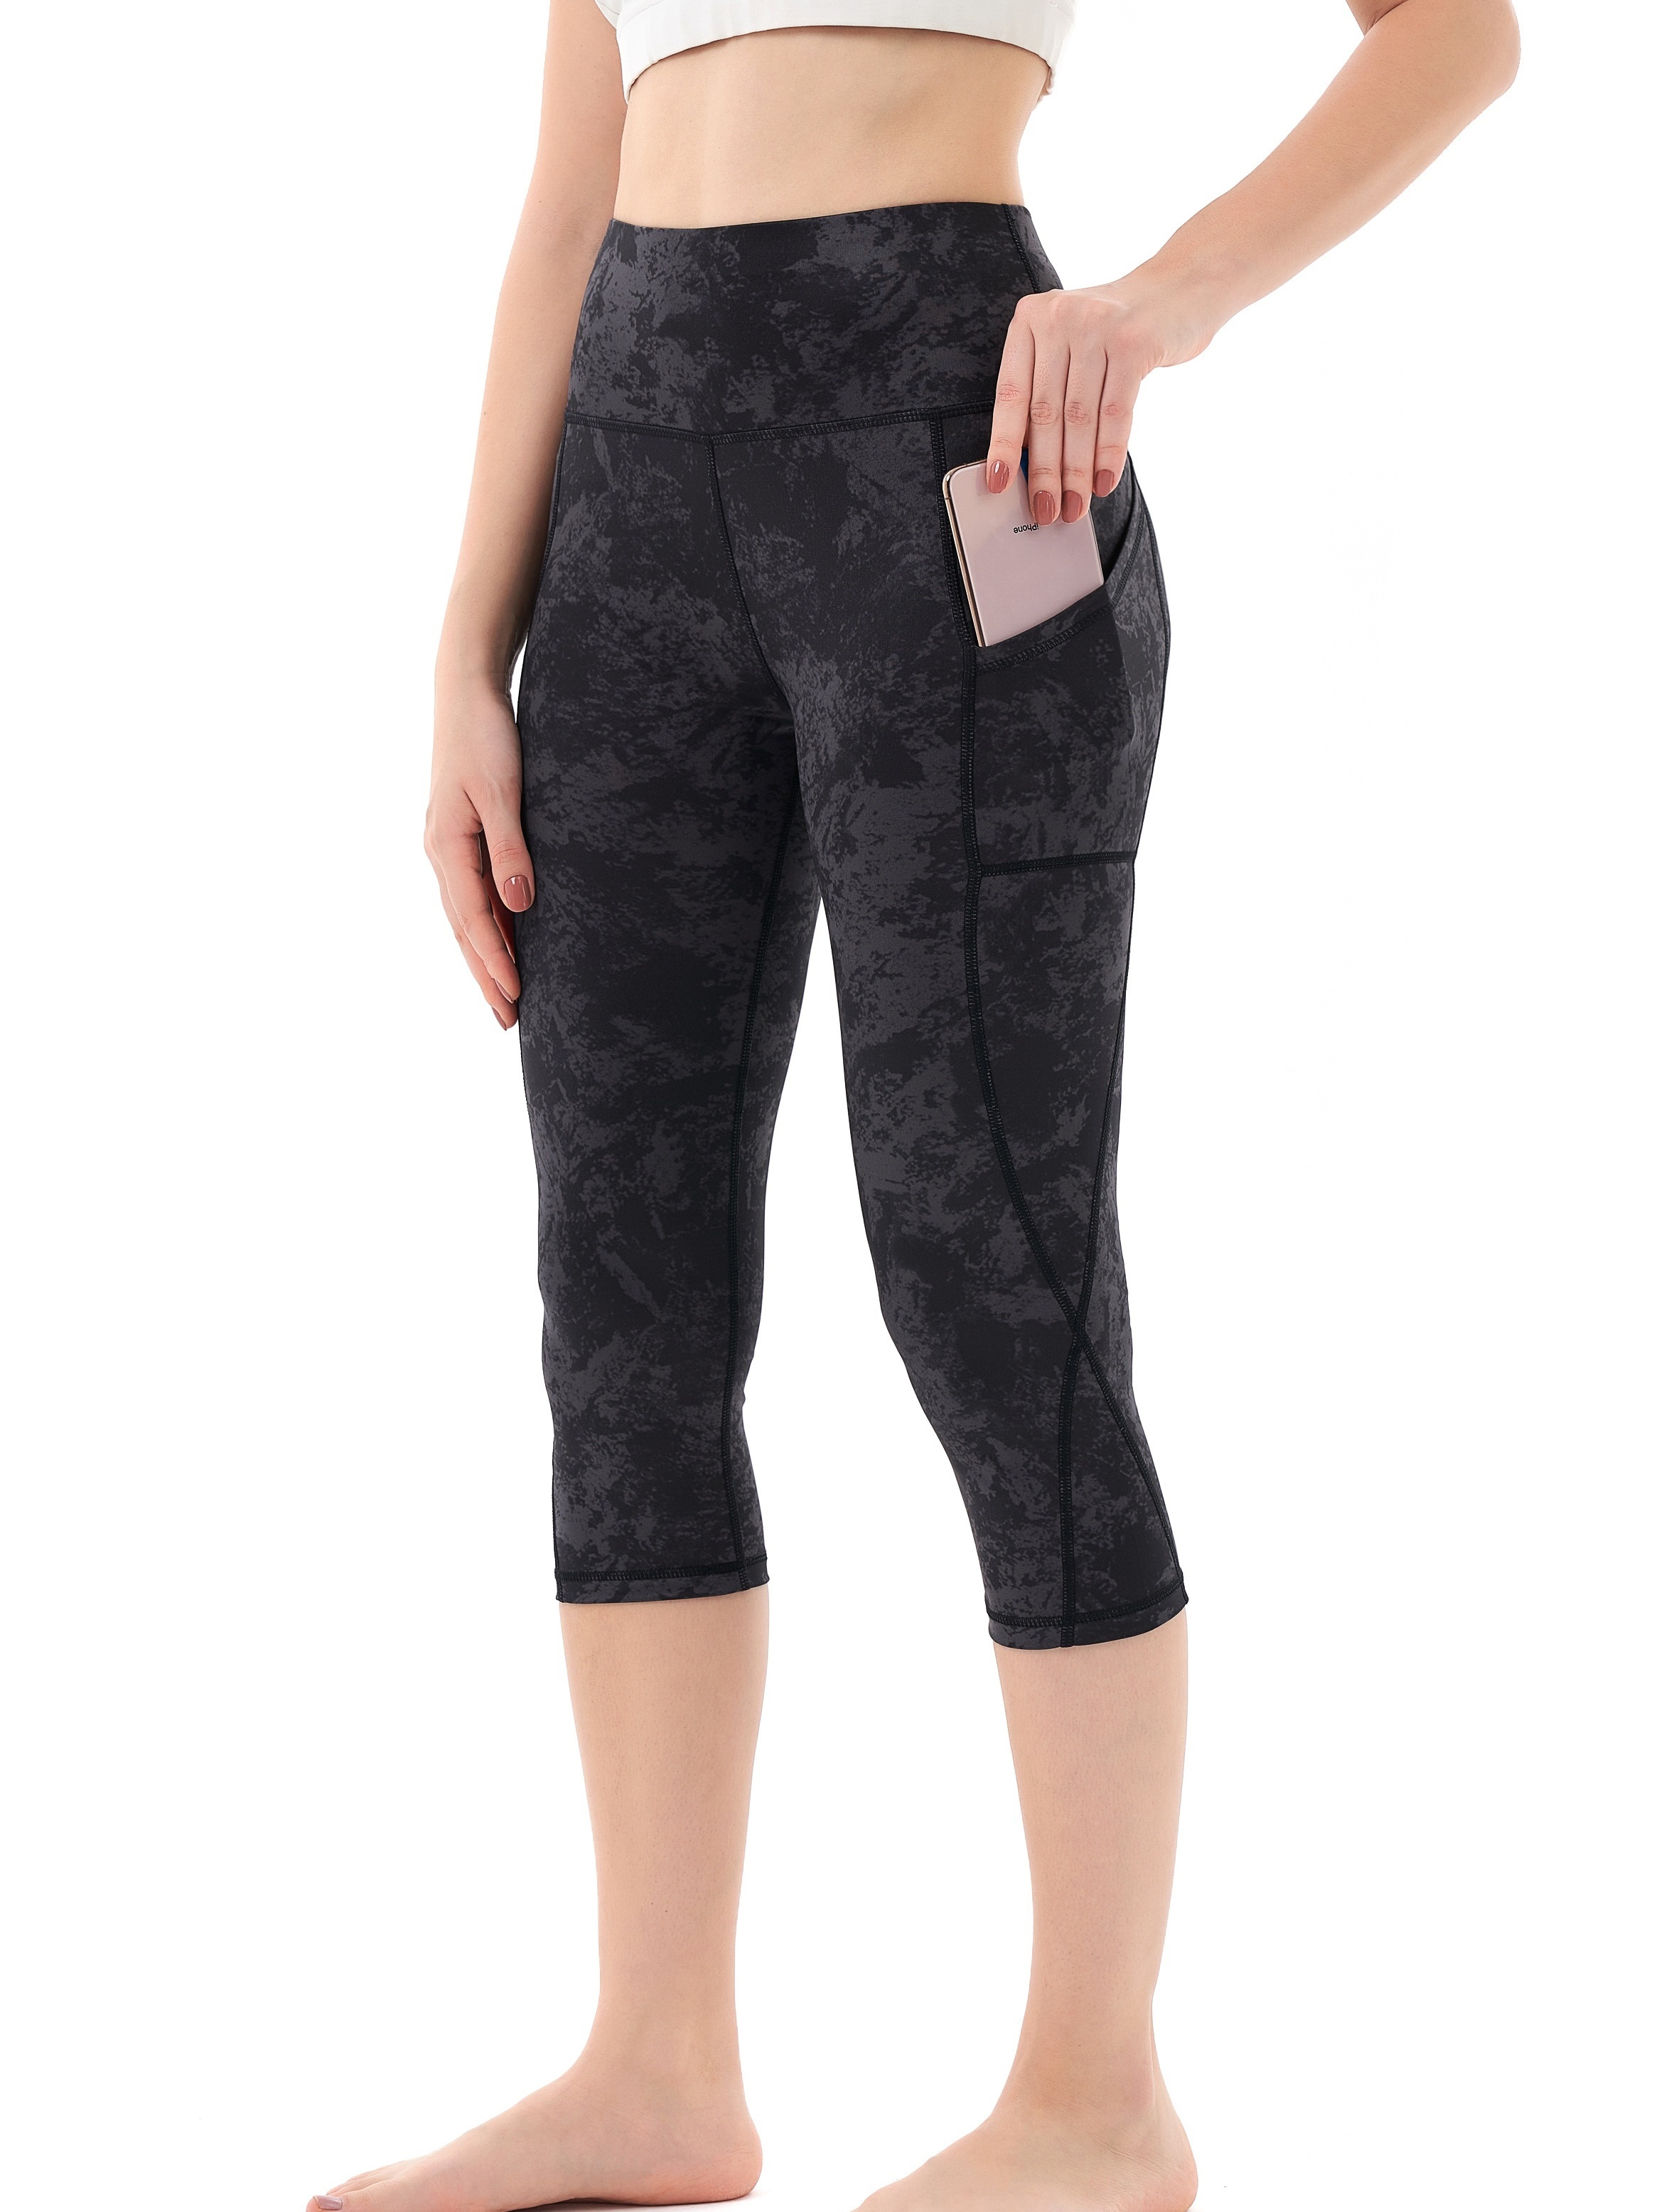 Msh Contrast Breathable Sports Capri Leggings With Pocket, High Waisted  Yoga Tight Capri Pants, Women's Activewear